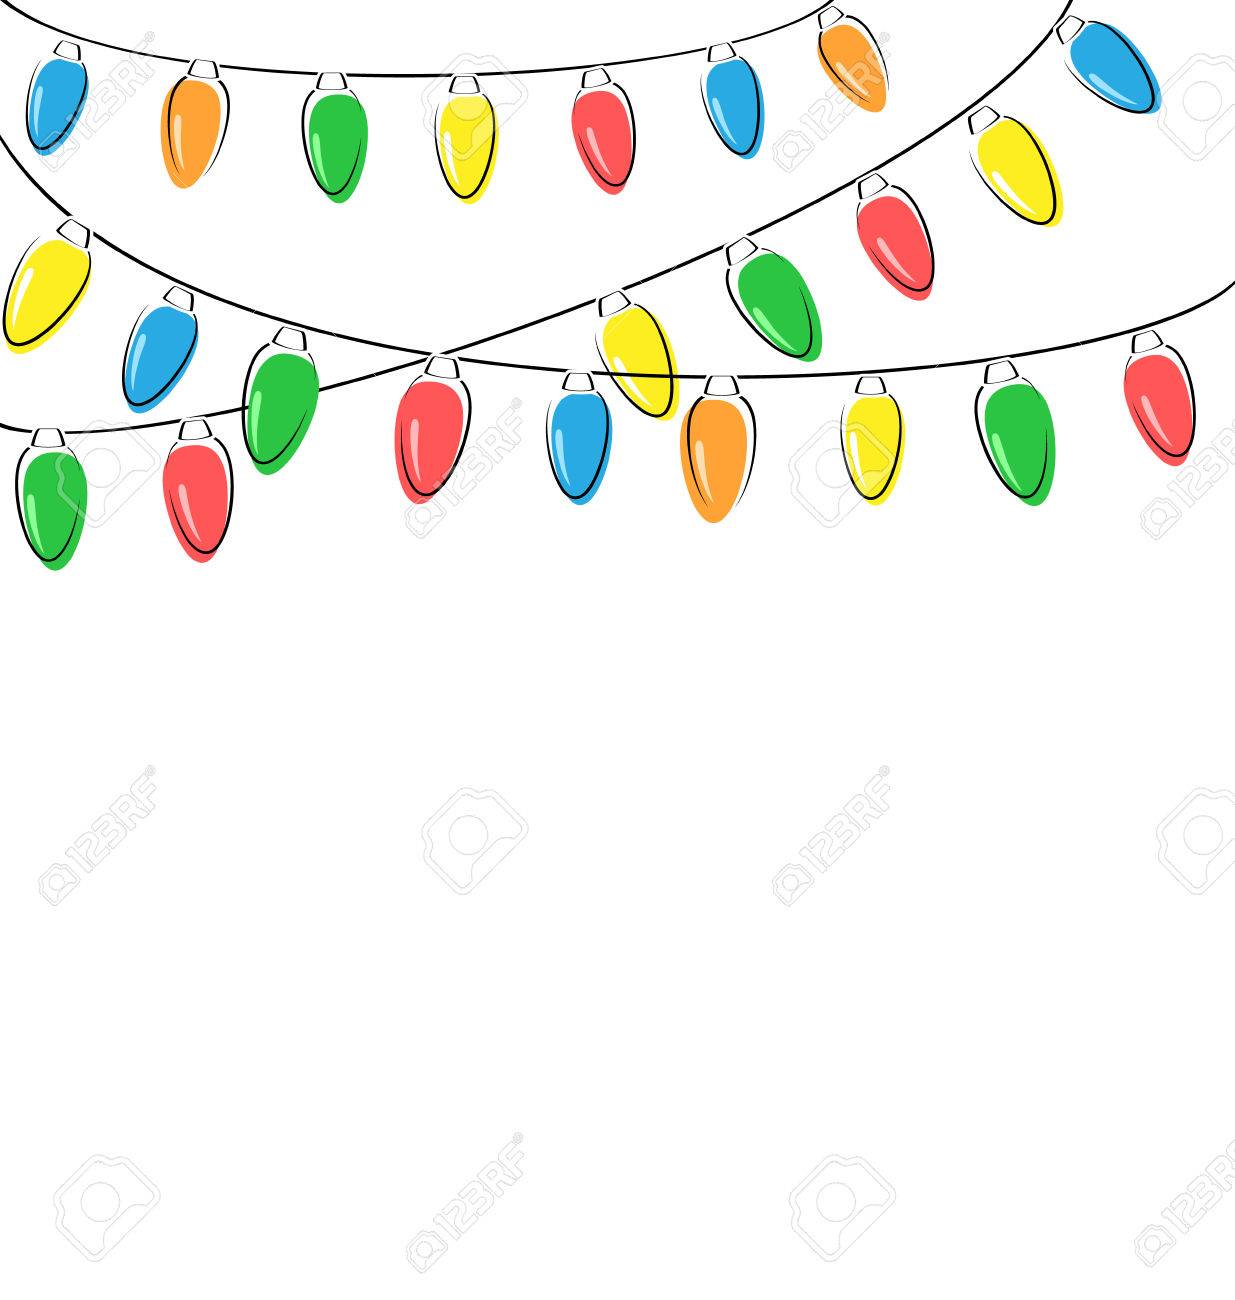 Multicolored flat led Christmas lights garland isolated on white...